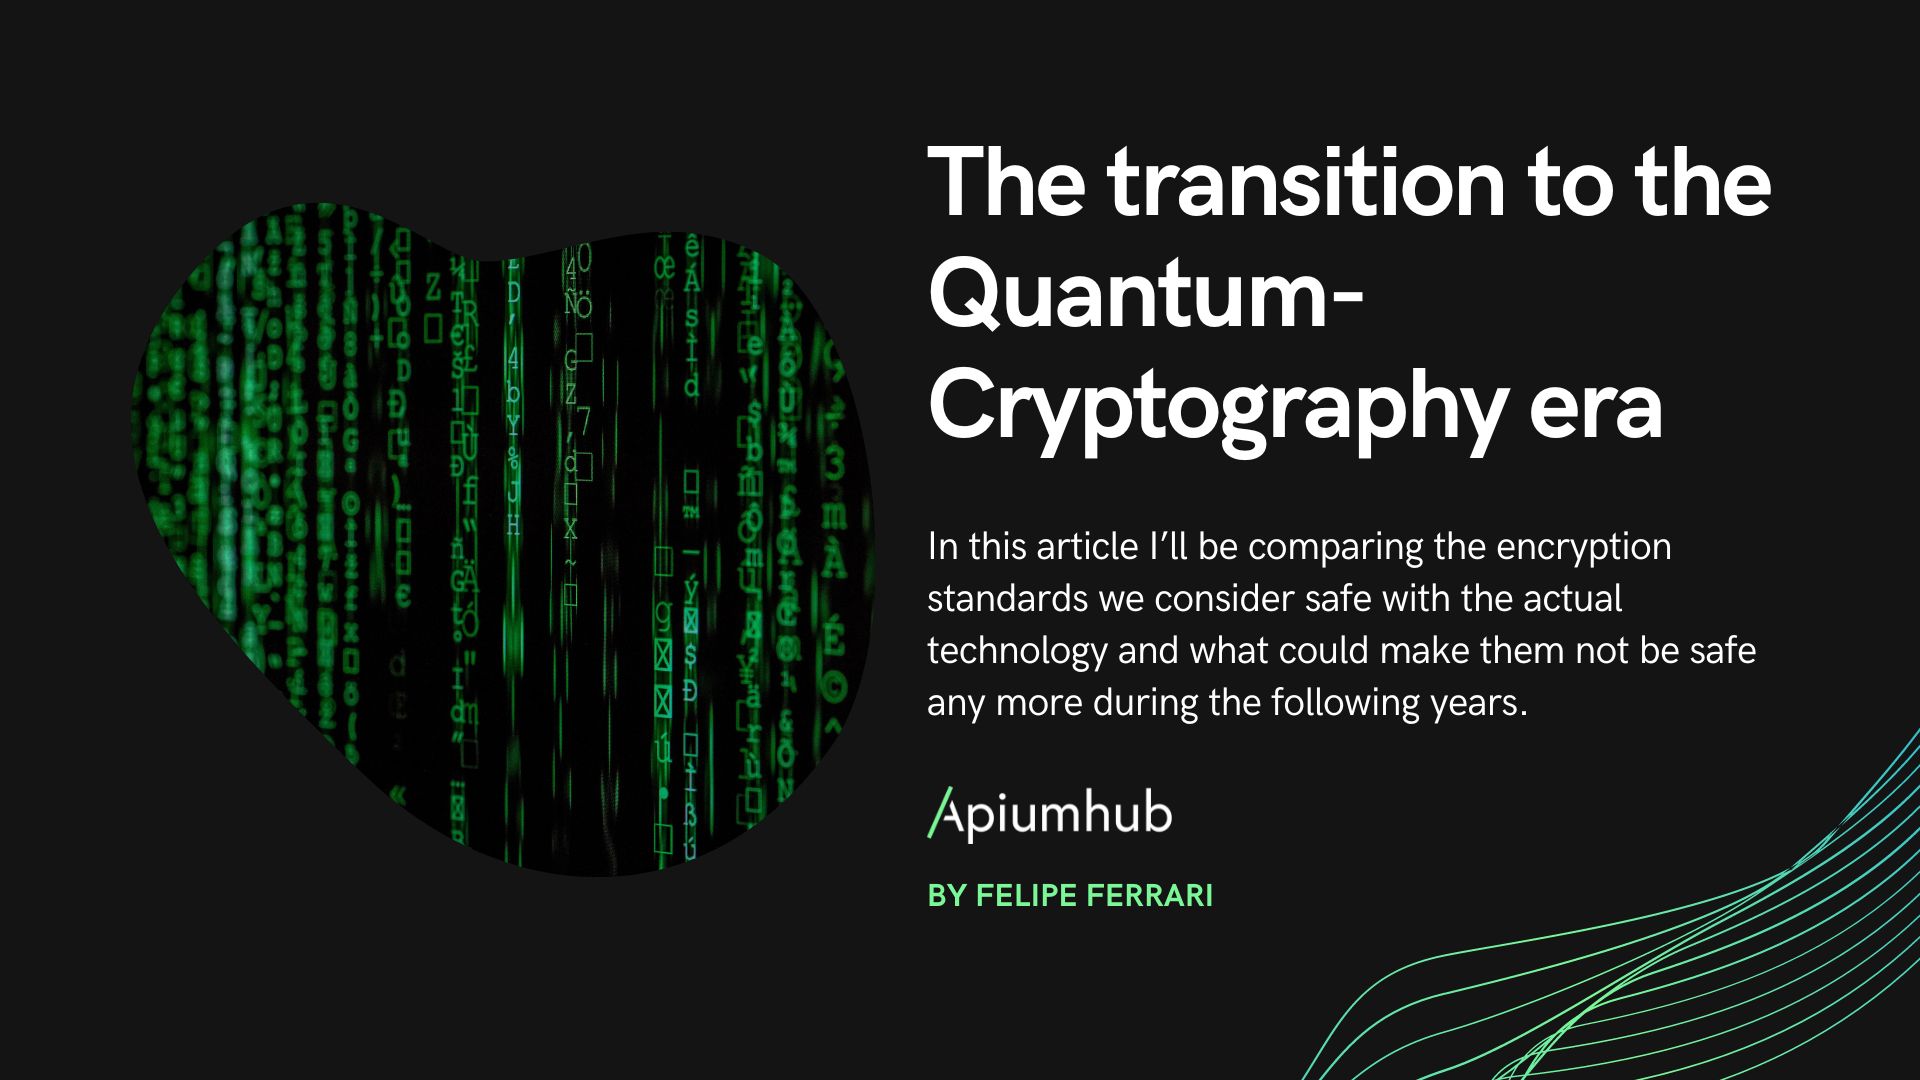 The Transition to the Quantum-Cryptography Era